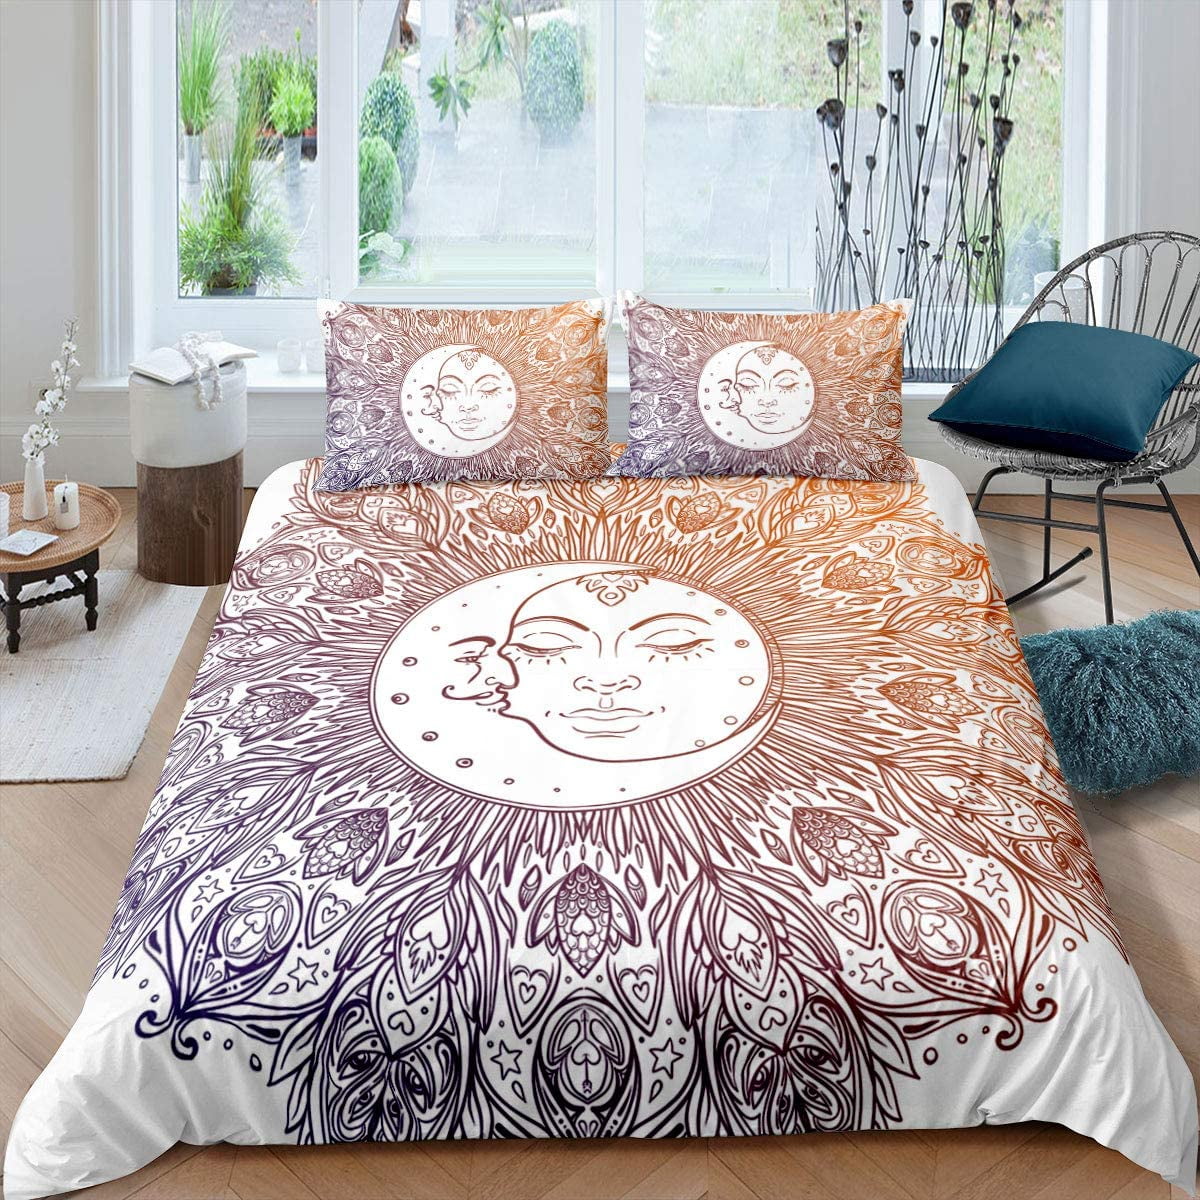 Find Sun Bedding Sets Queen Size Egyptian Money Currency Pattern Duvet  Cover Set with 1 Duvet Cover and 2 Pillow Shams,Gifts for Girls Boys